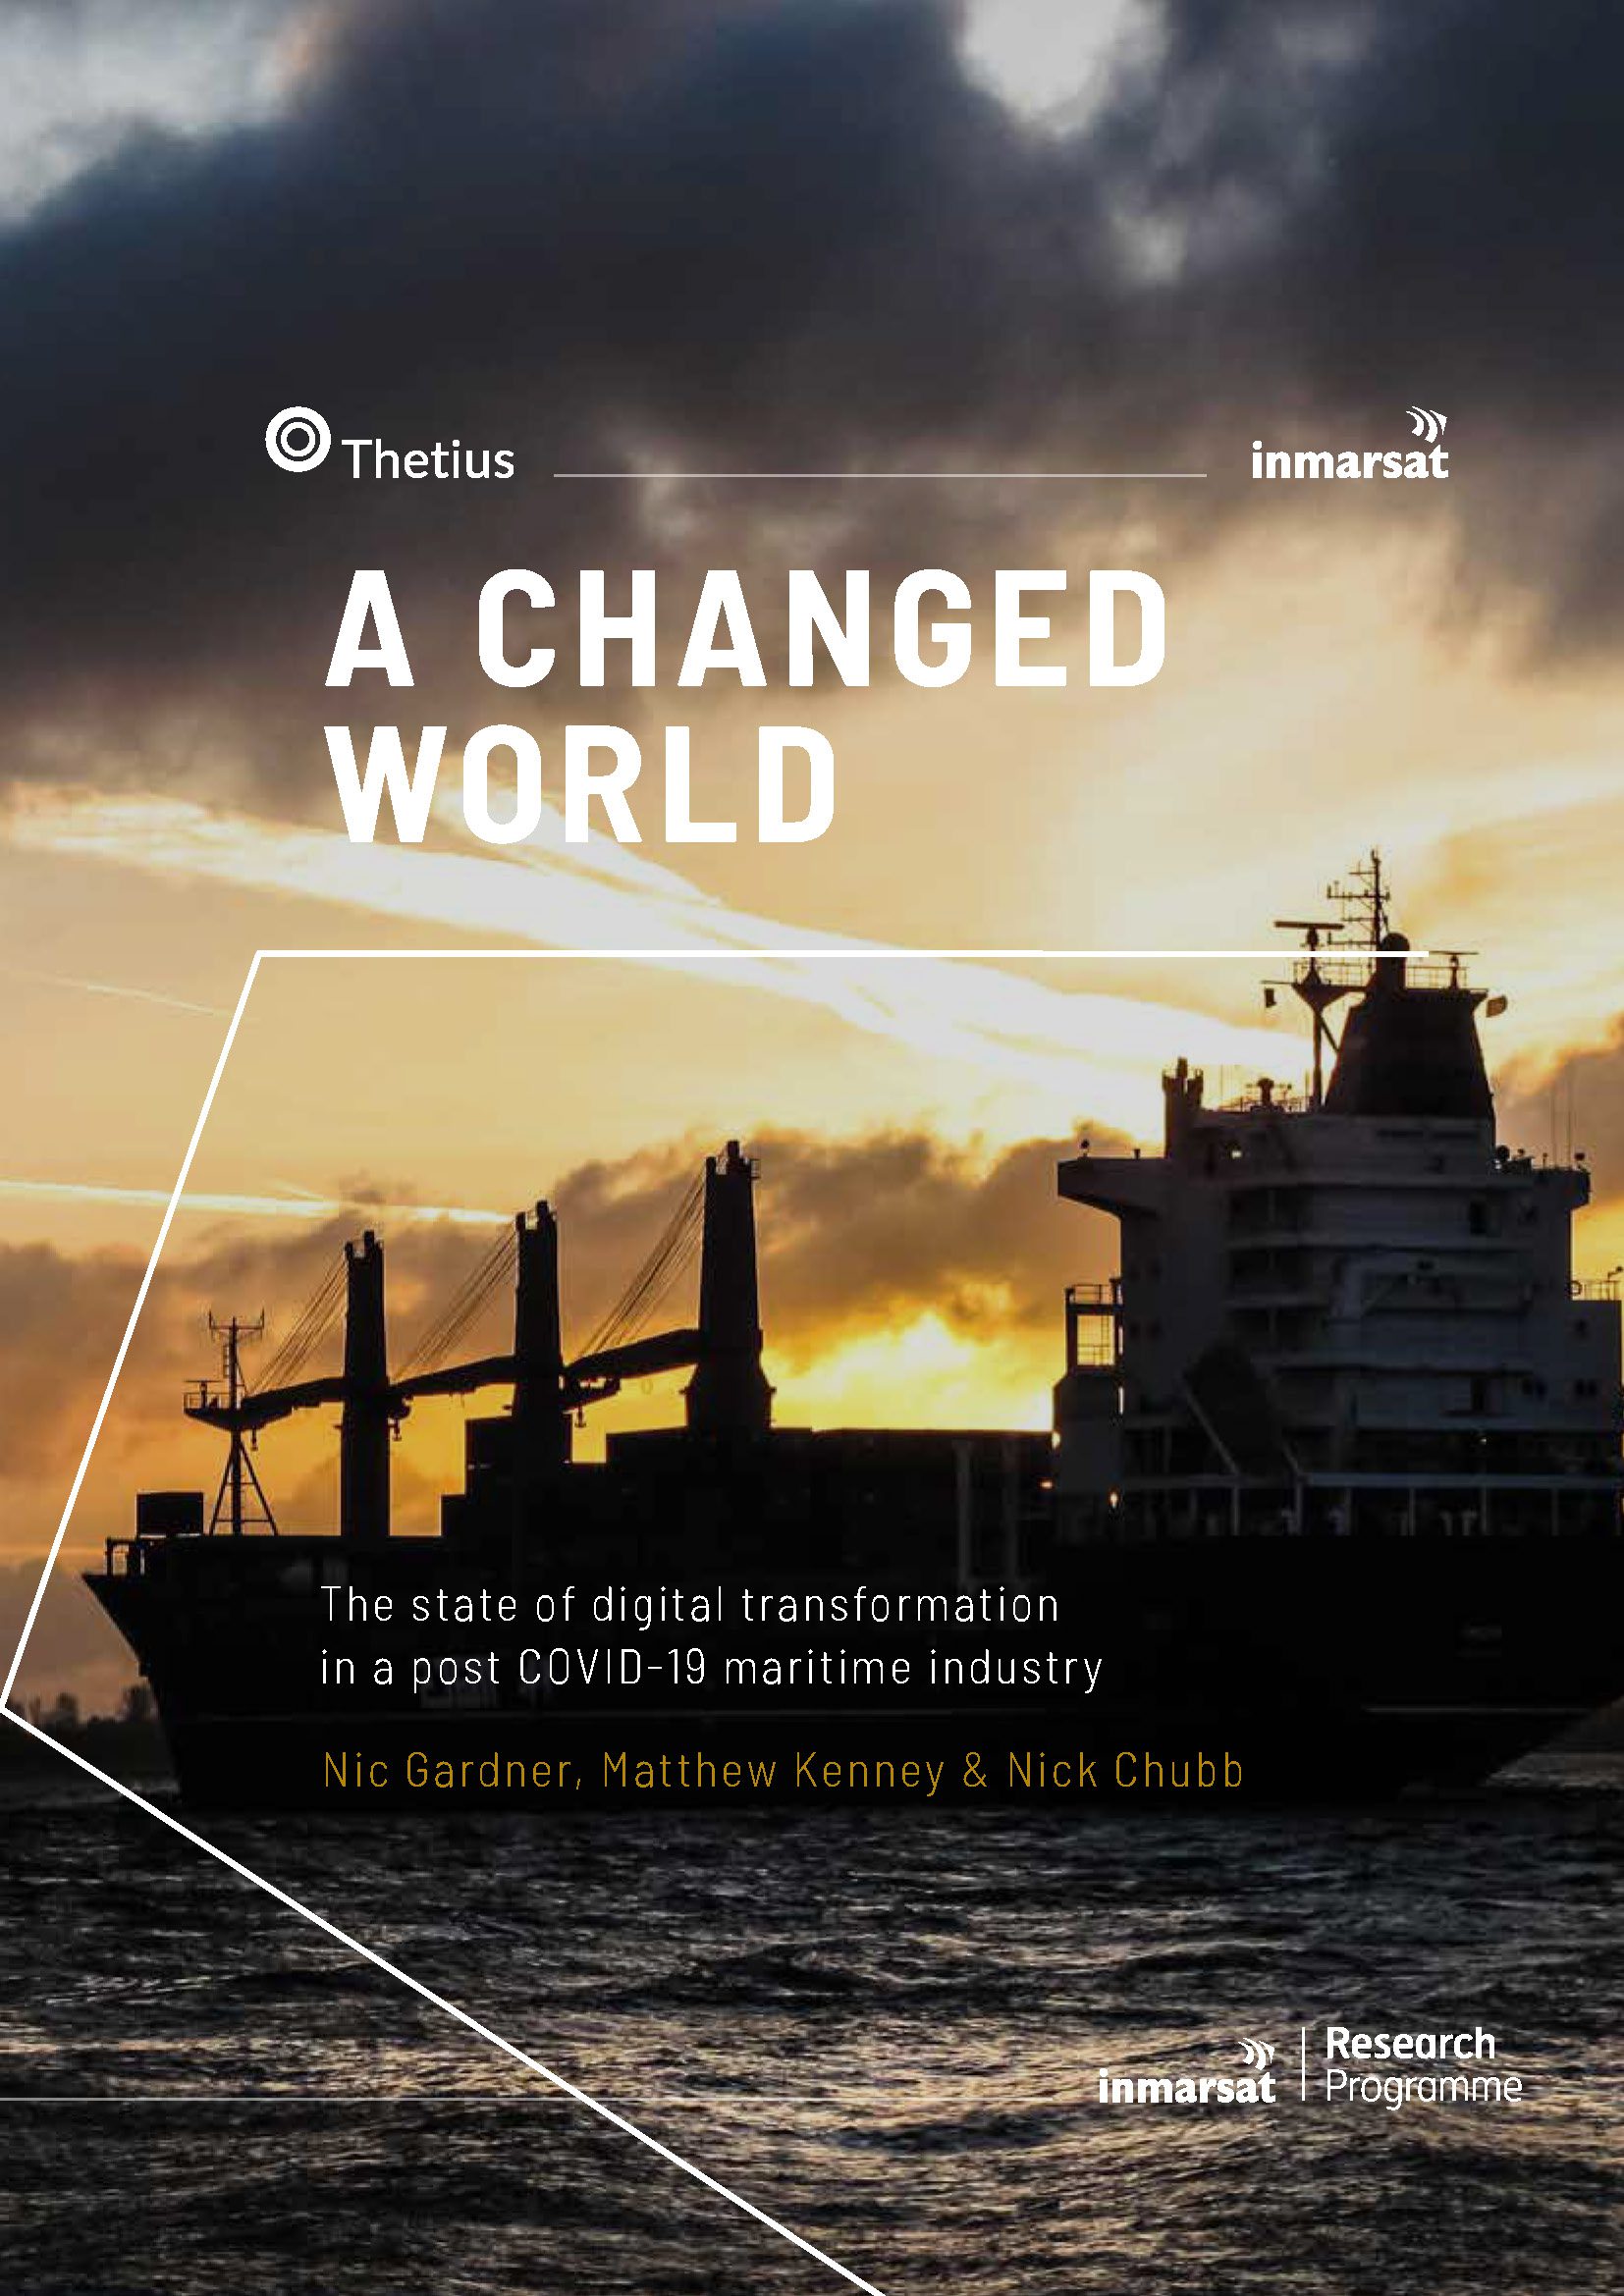 Significant acceleration in digitalisation of maritime industry highlighted in Inmarsat report